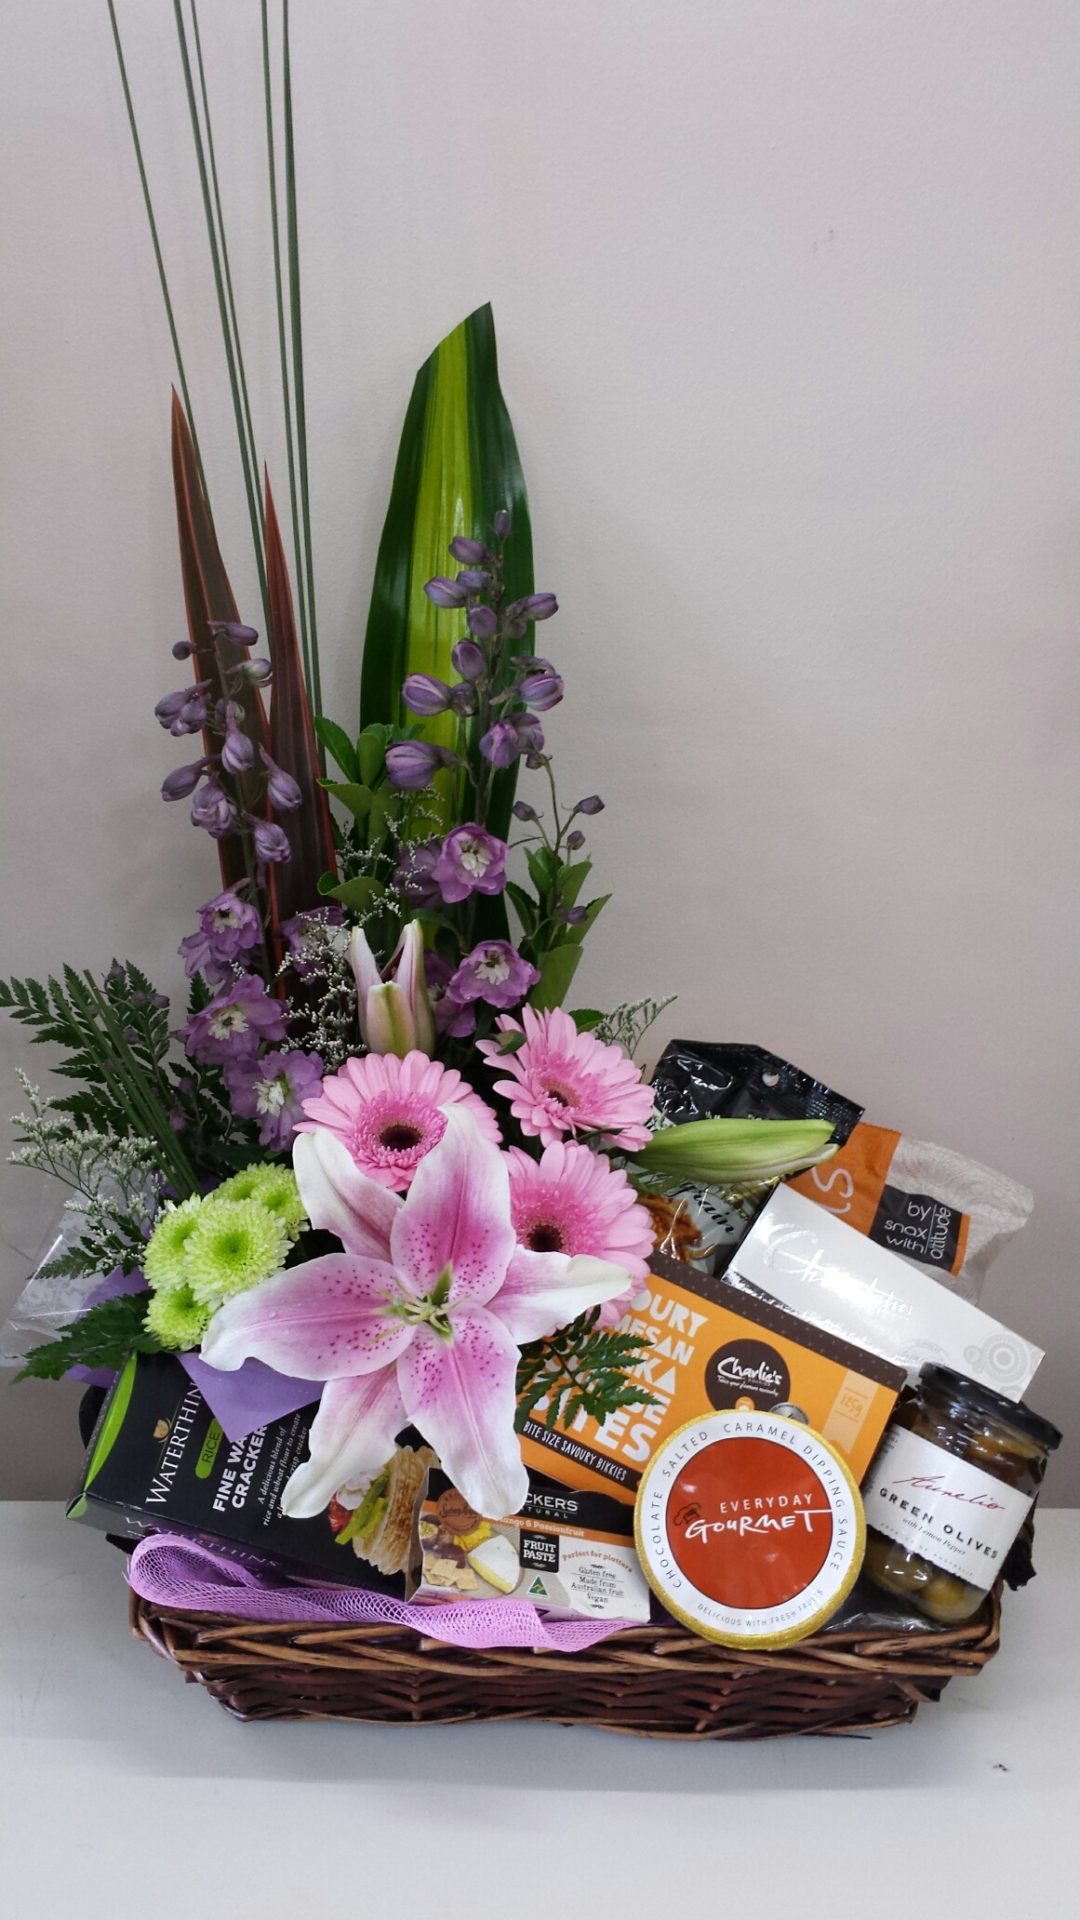 Selection of gourmet products with flower arrangement on one side